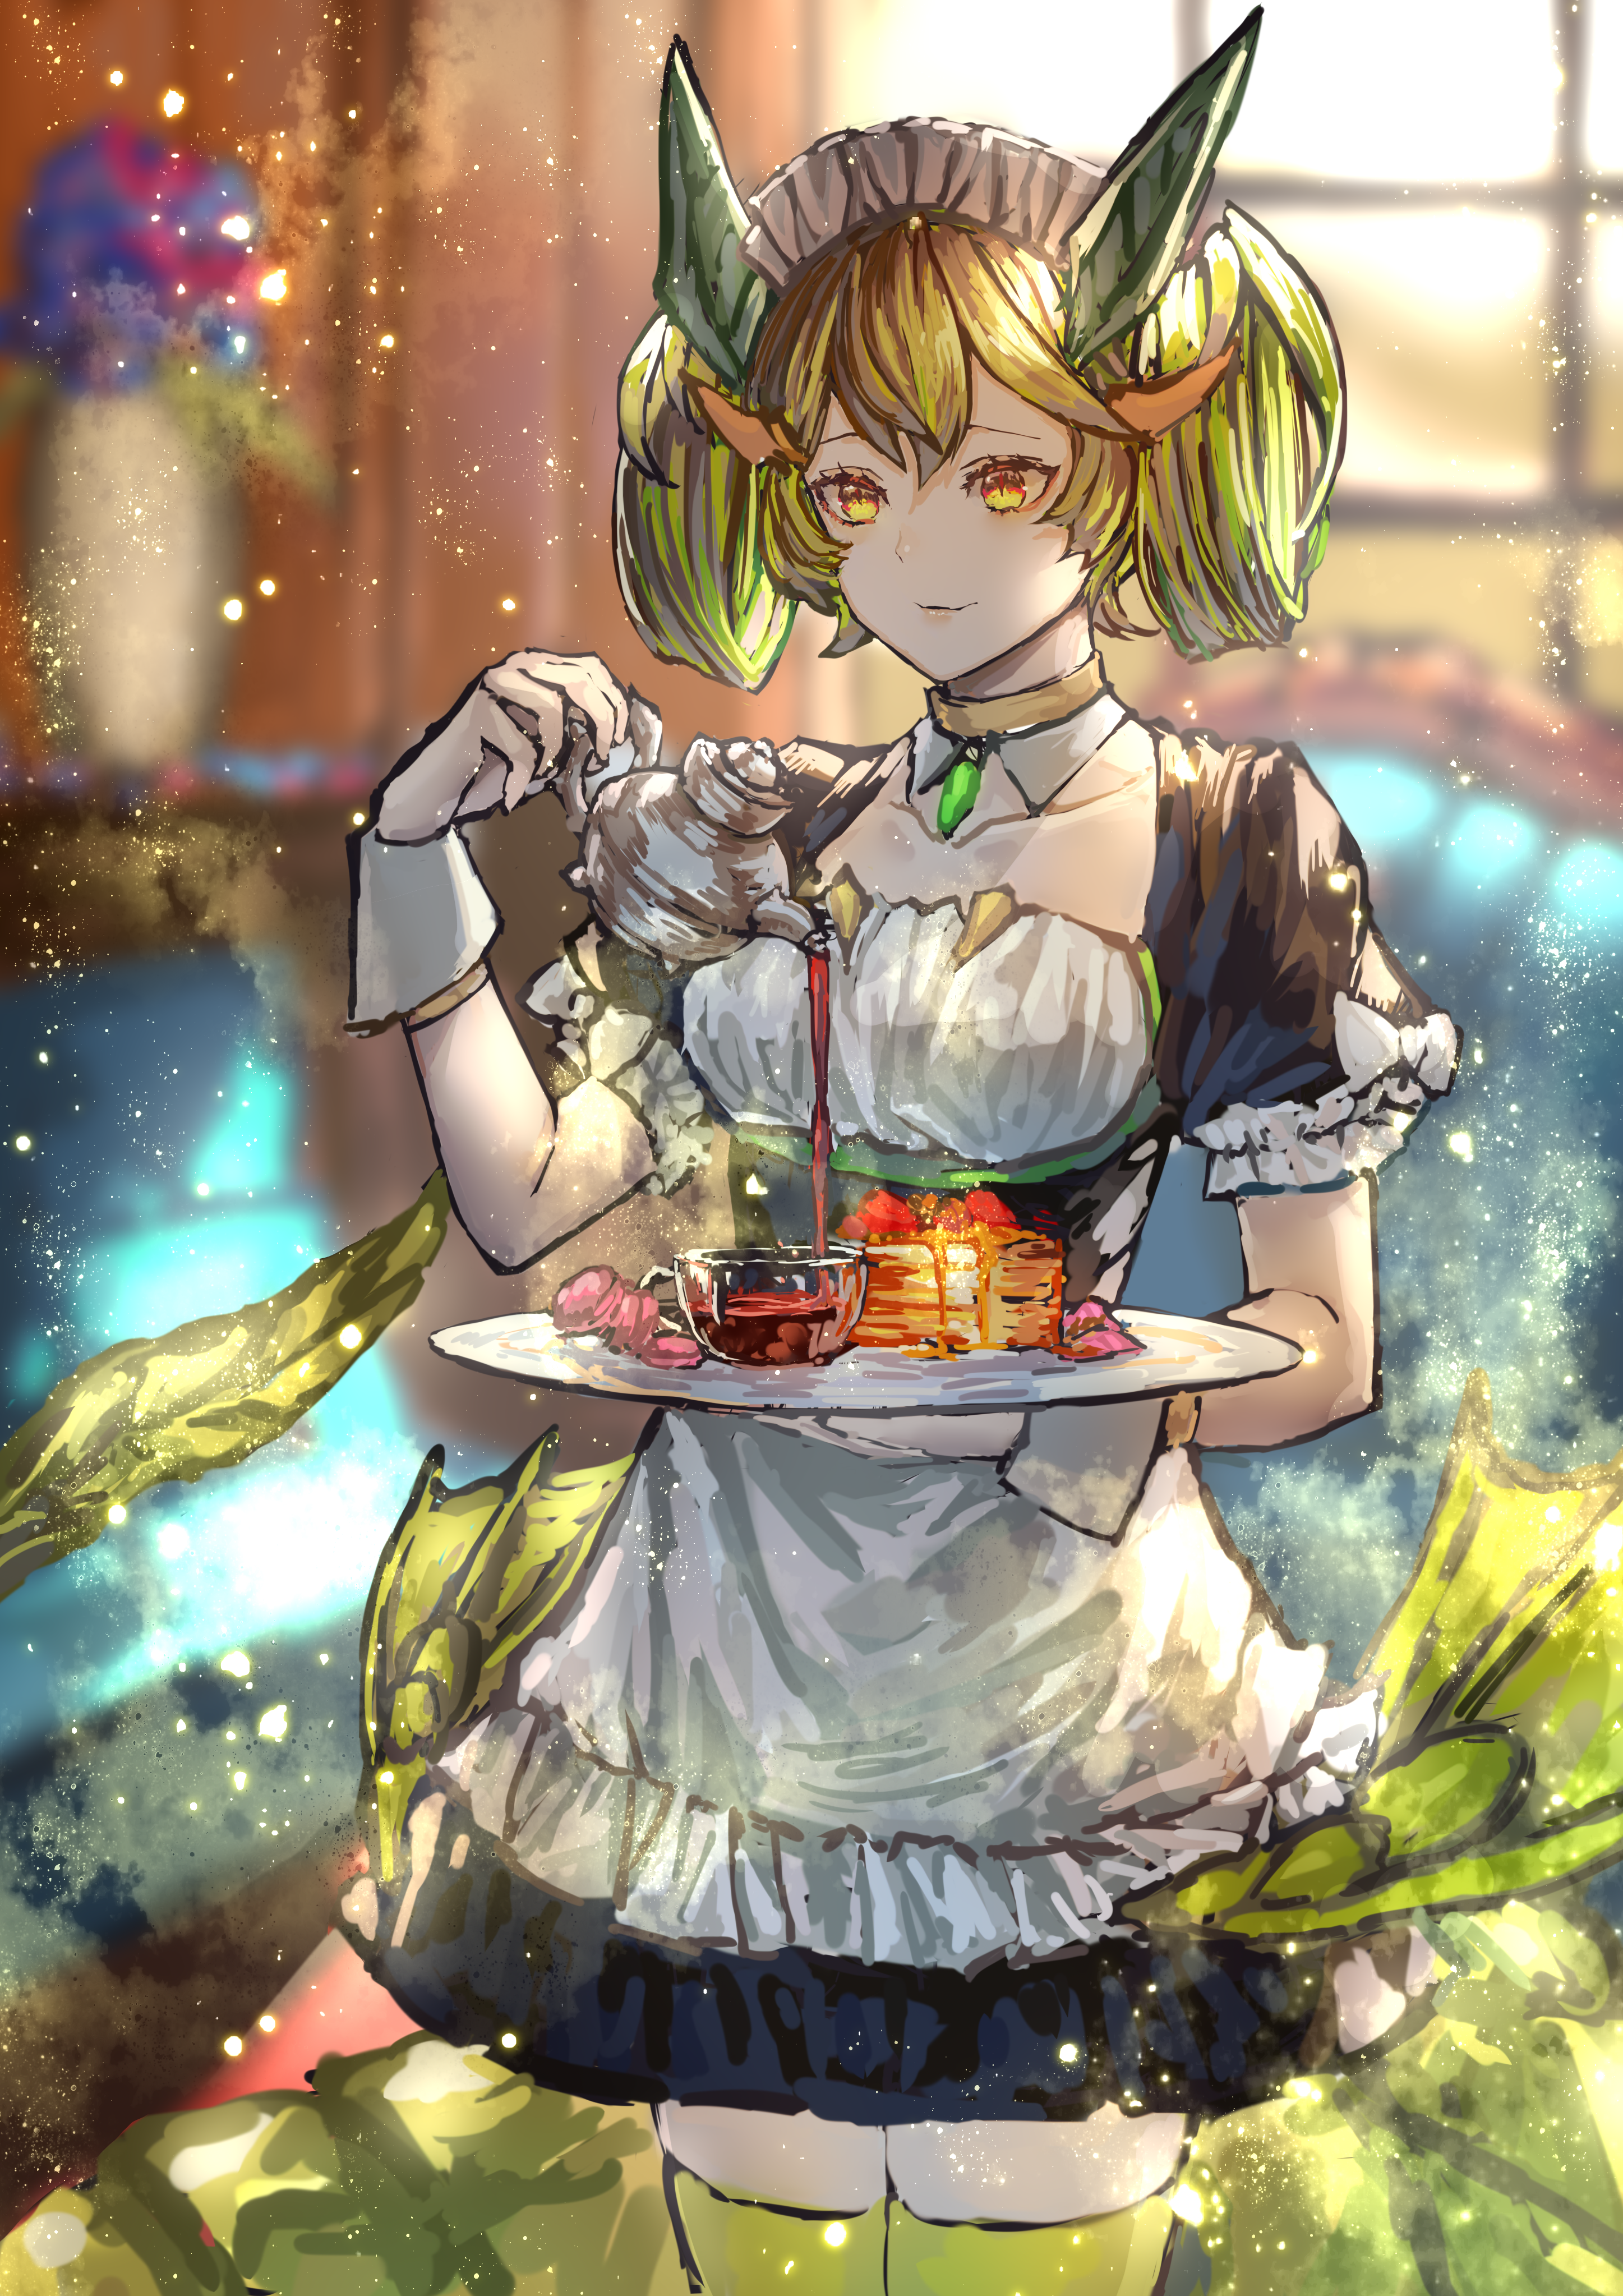 Anime Anime Girls Trading Card Games Yu Gi Oh Parlor Dragonmaid Twintails Green Hair Maid Outfit Mai 2894x4093